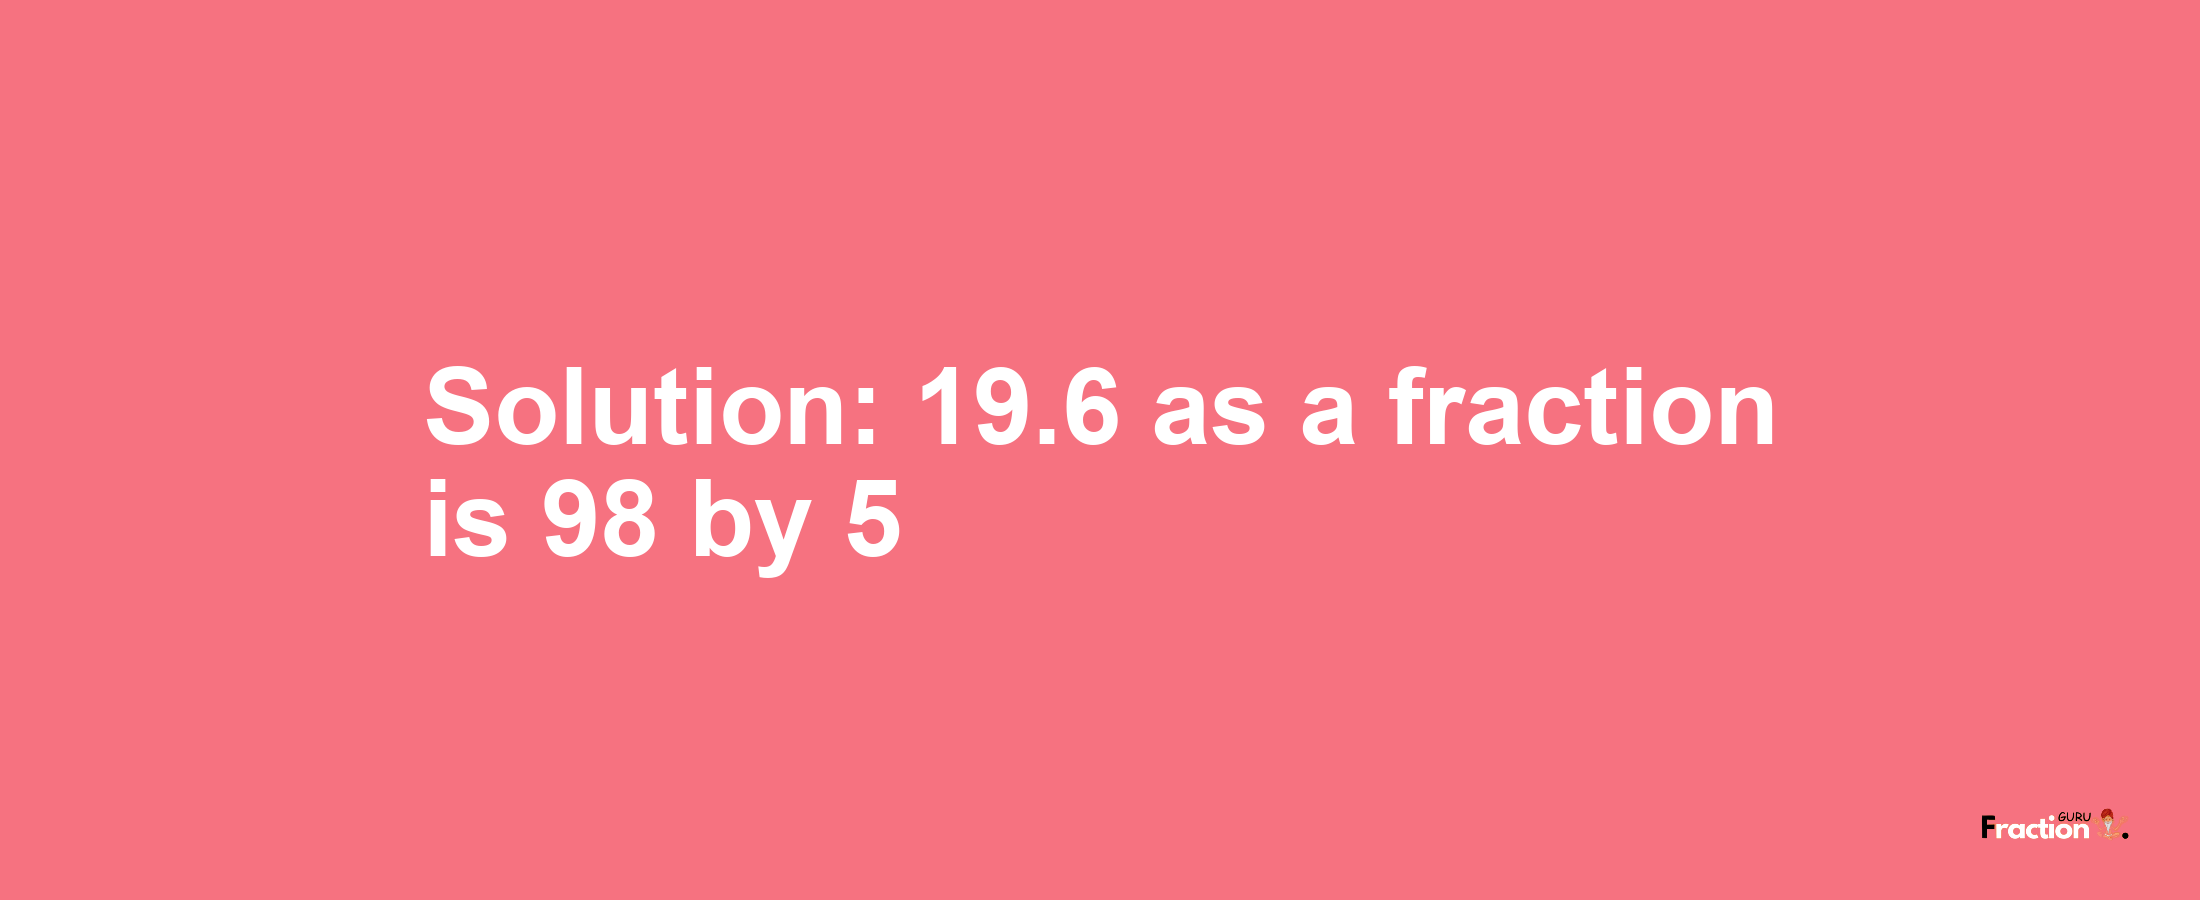 Solution:19.6 as a fraction is 98/5